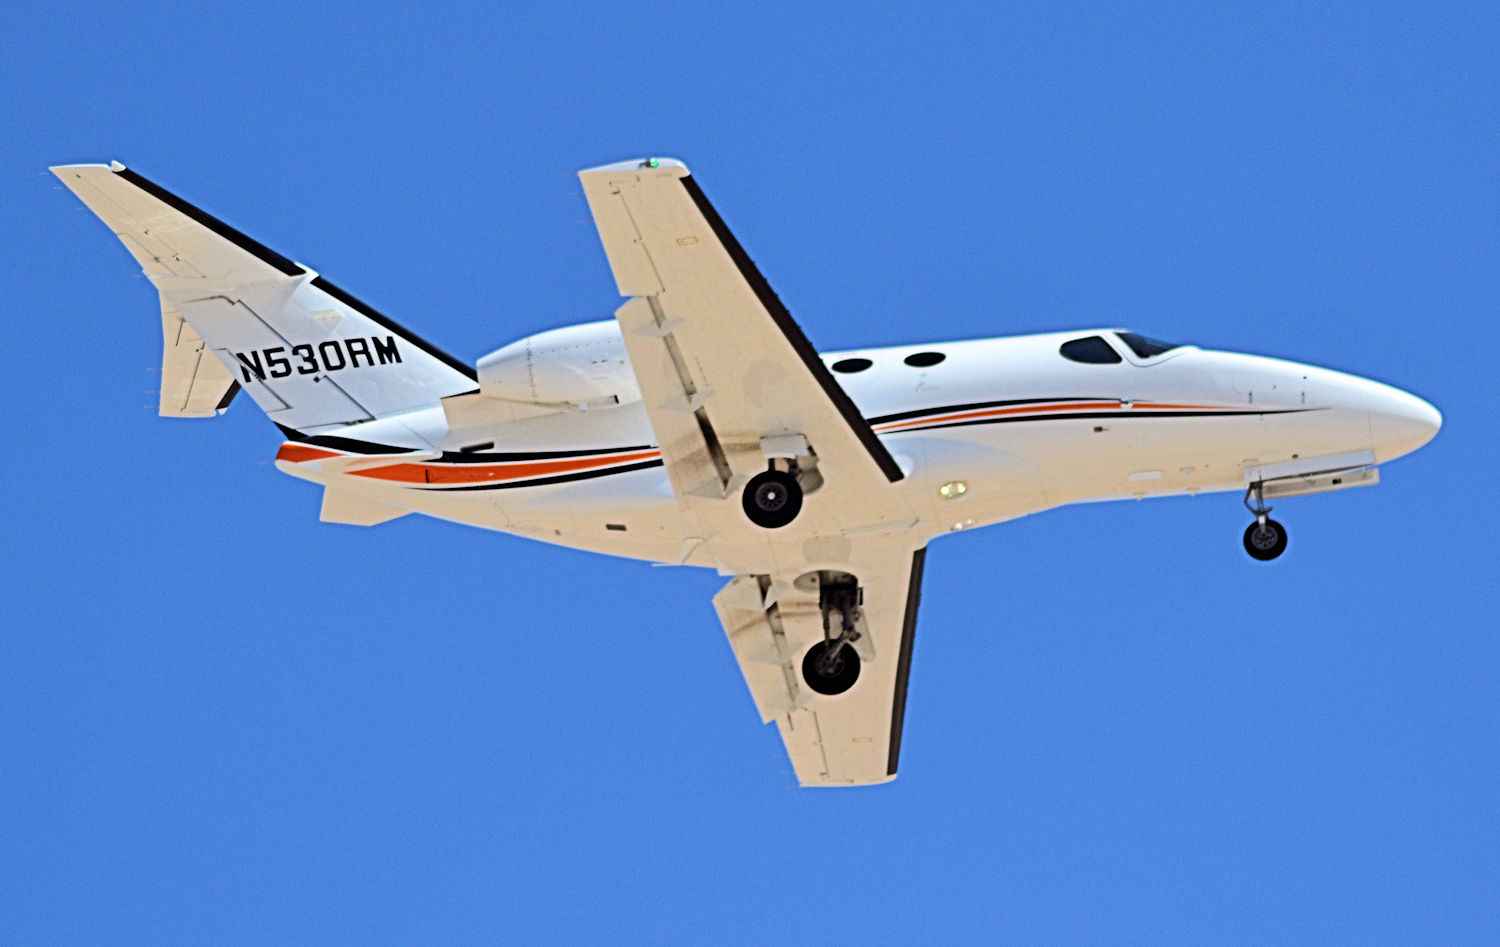 N580RM/N580RM Corporate Cessna Citation Mustang Airframe Information - AVSpotters.com